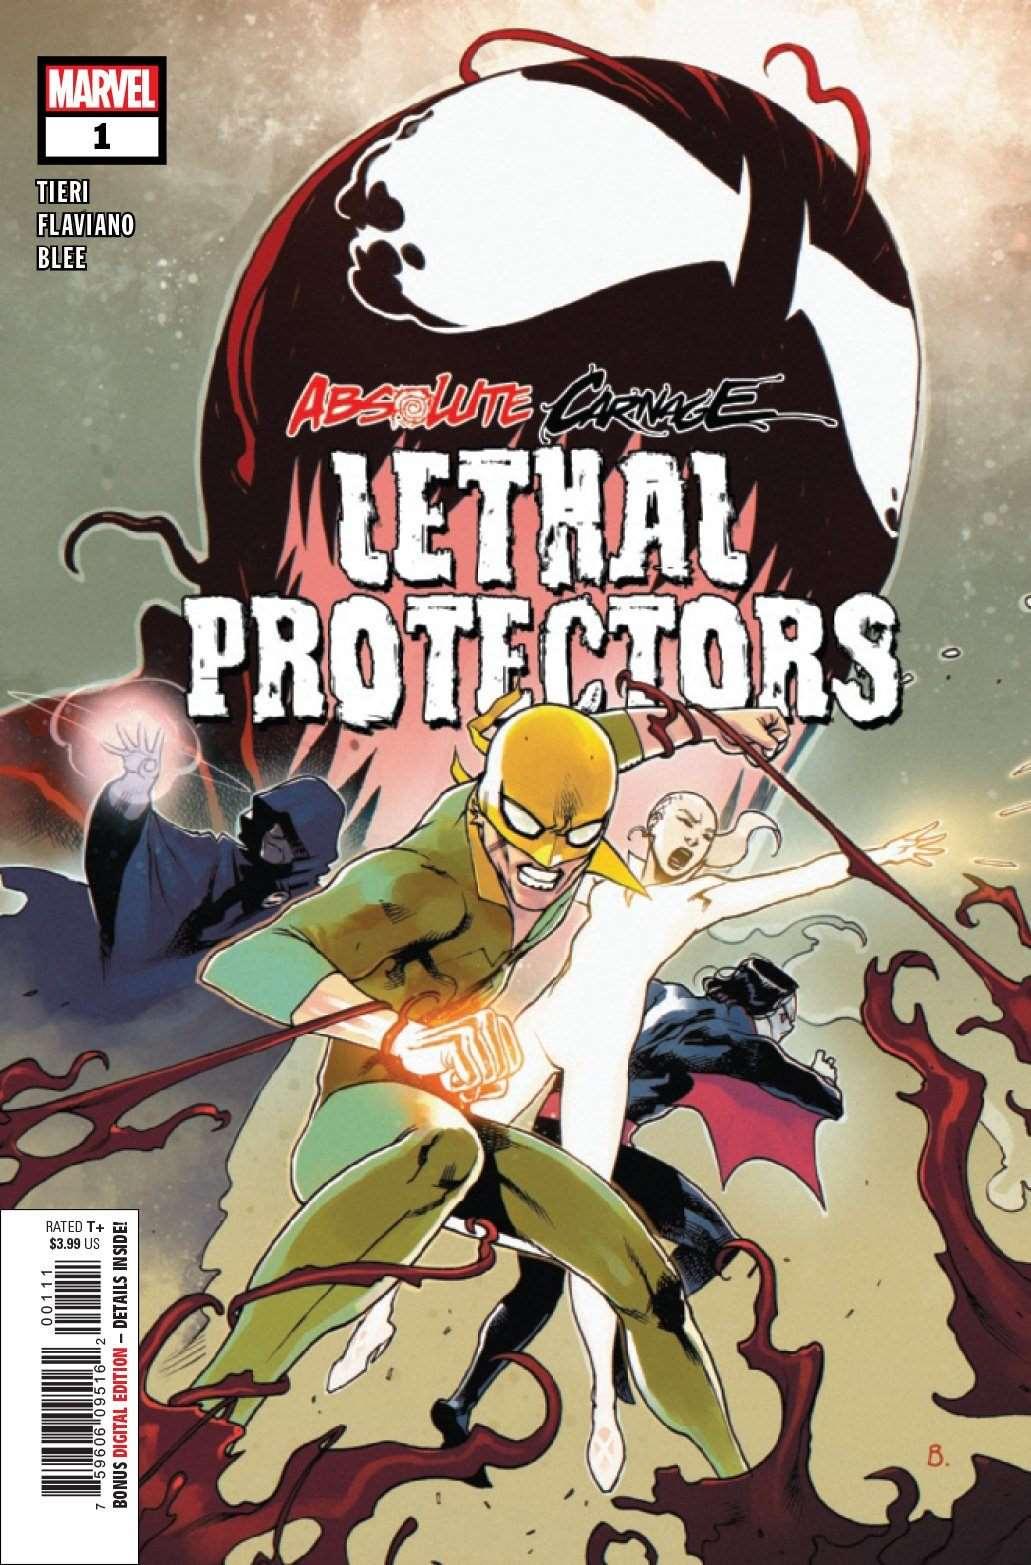 ABSOLUTE CARNAGE LETHAL PROTECTORS #1 (OF 3) AC - PCKComics.com